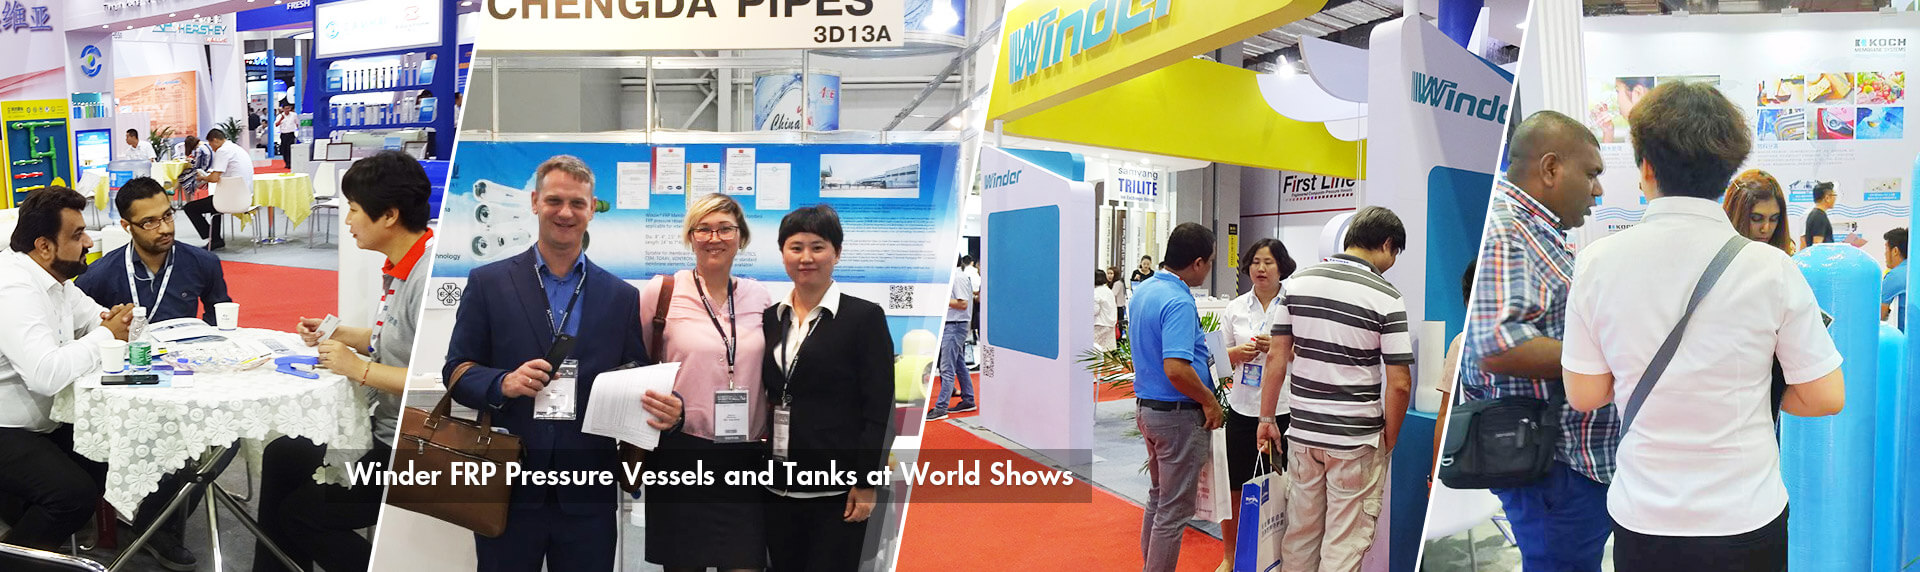 Winder FRP Pressure Vessels and Tanks at World Shows